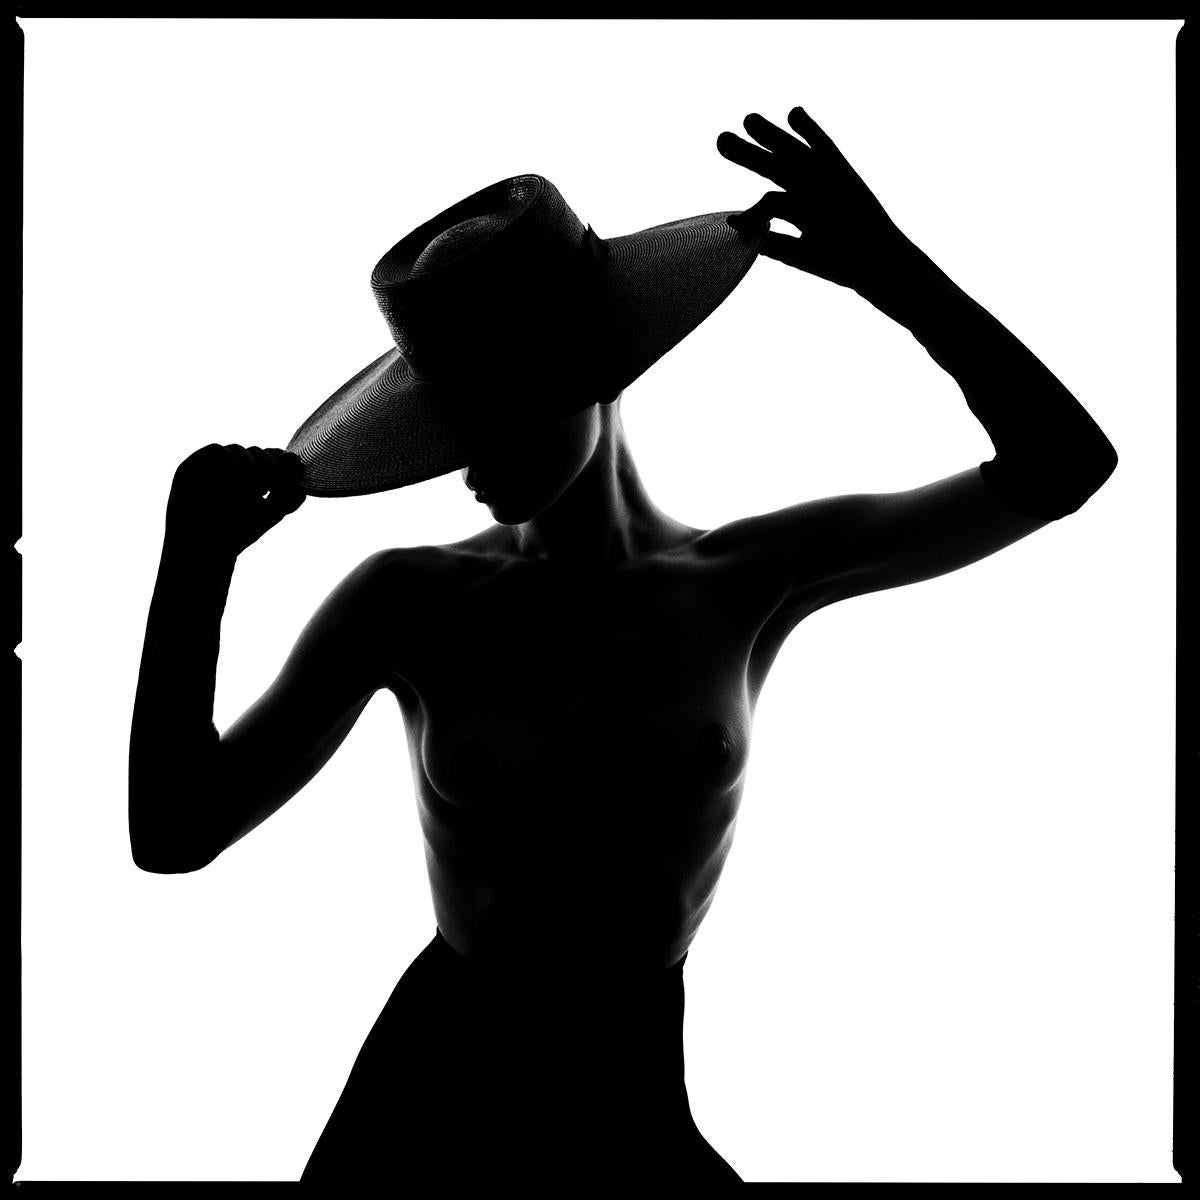 Tyler Shields - Hat Silhouette, Photography 2020, Printed After